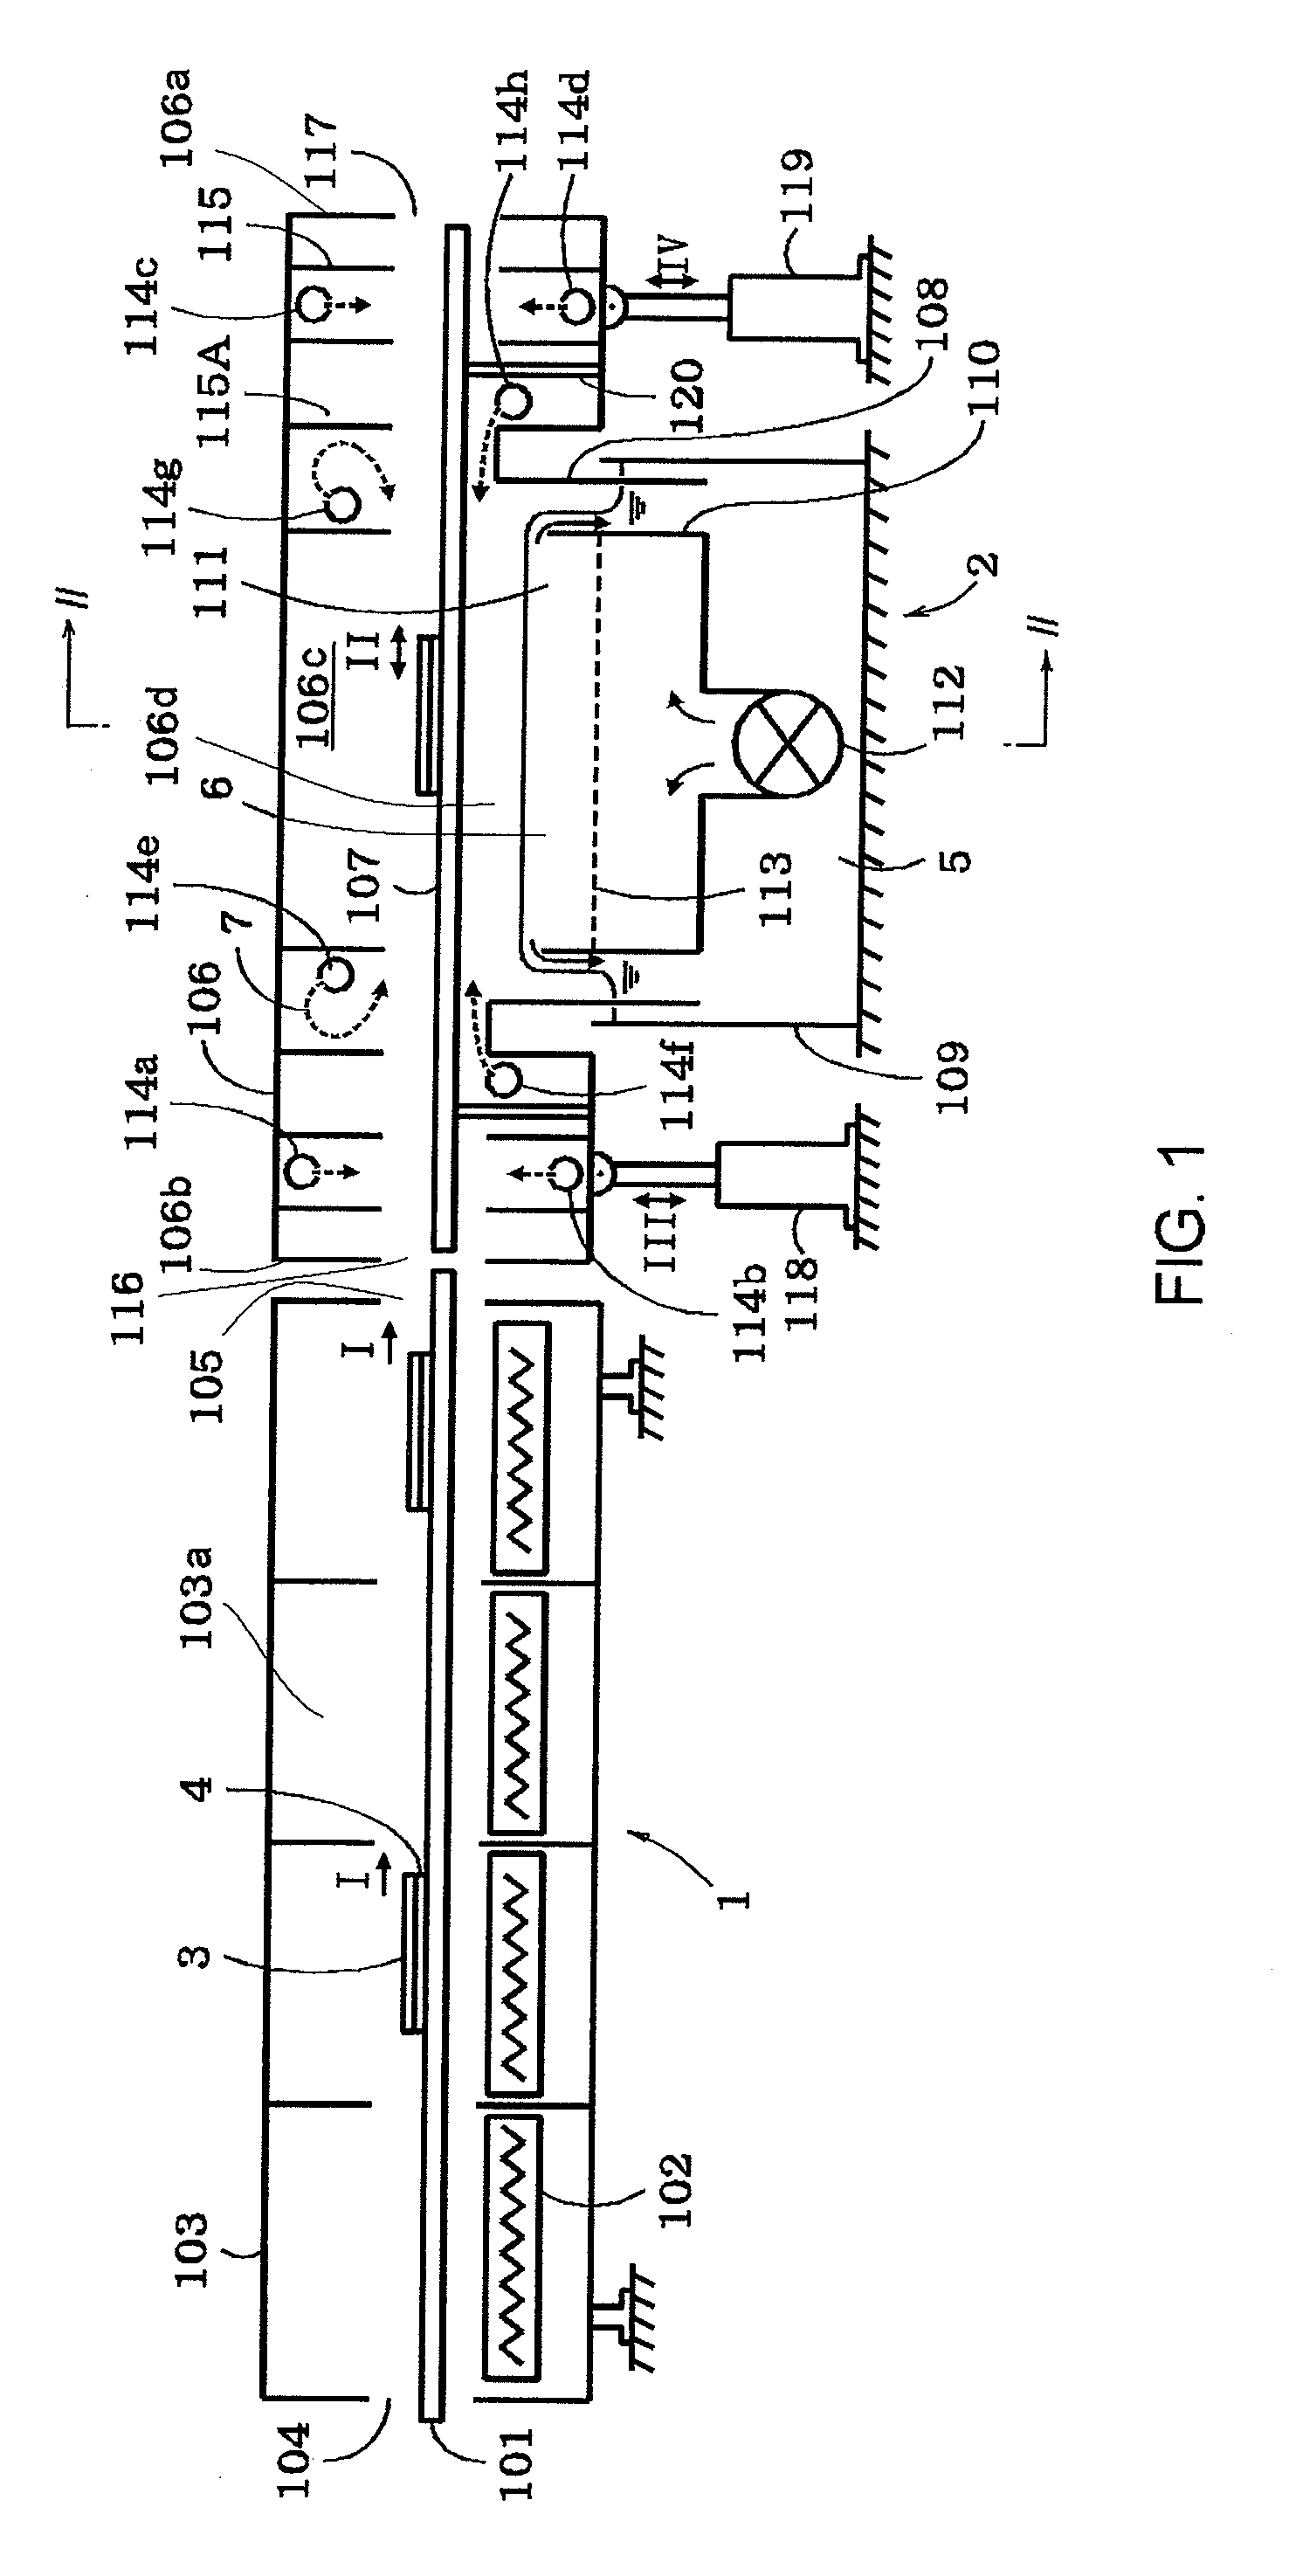 Apparatus and method for soldering flat work piece